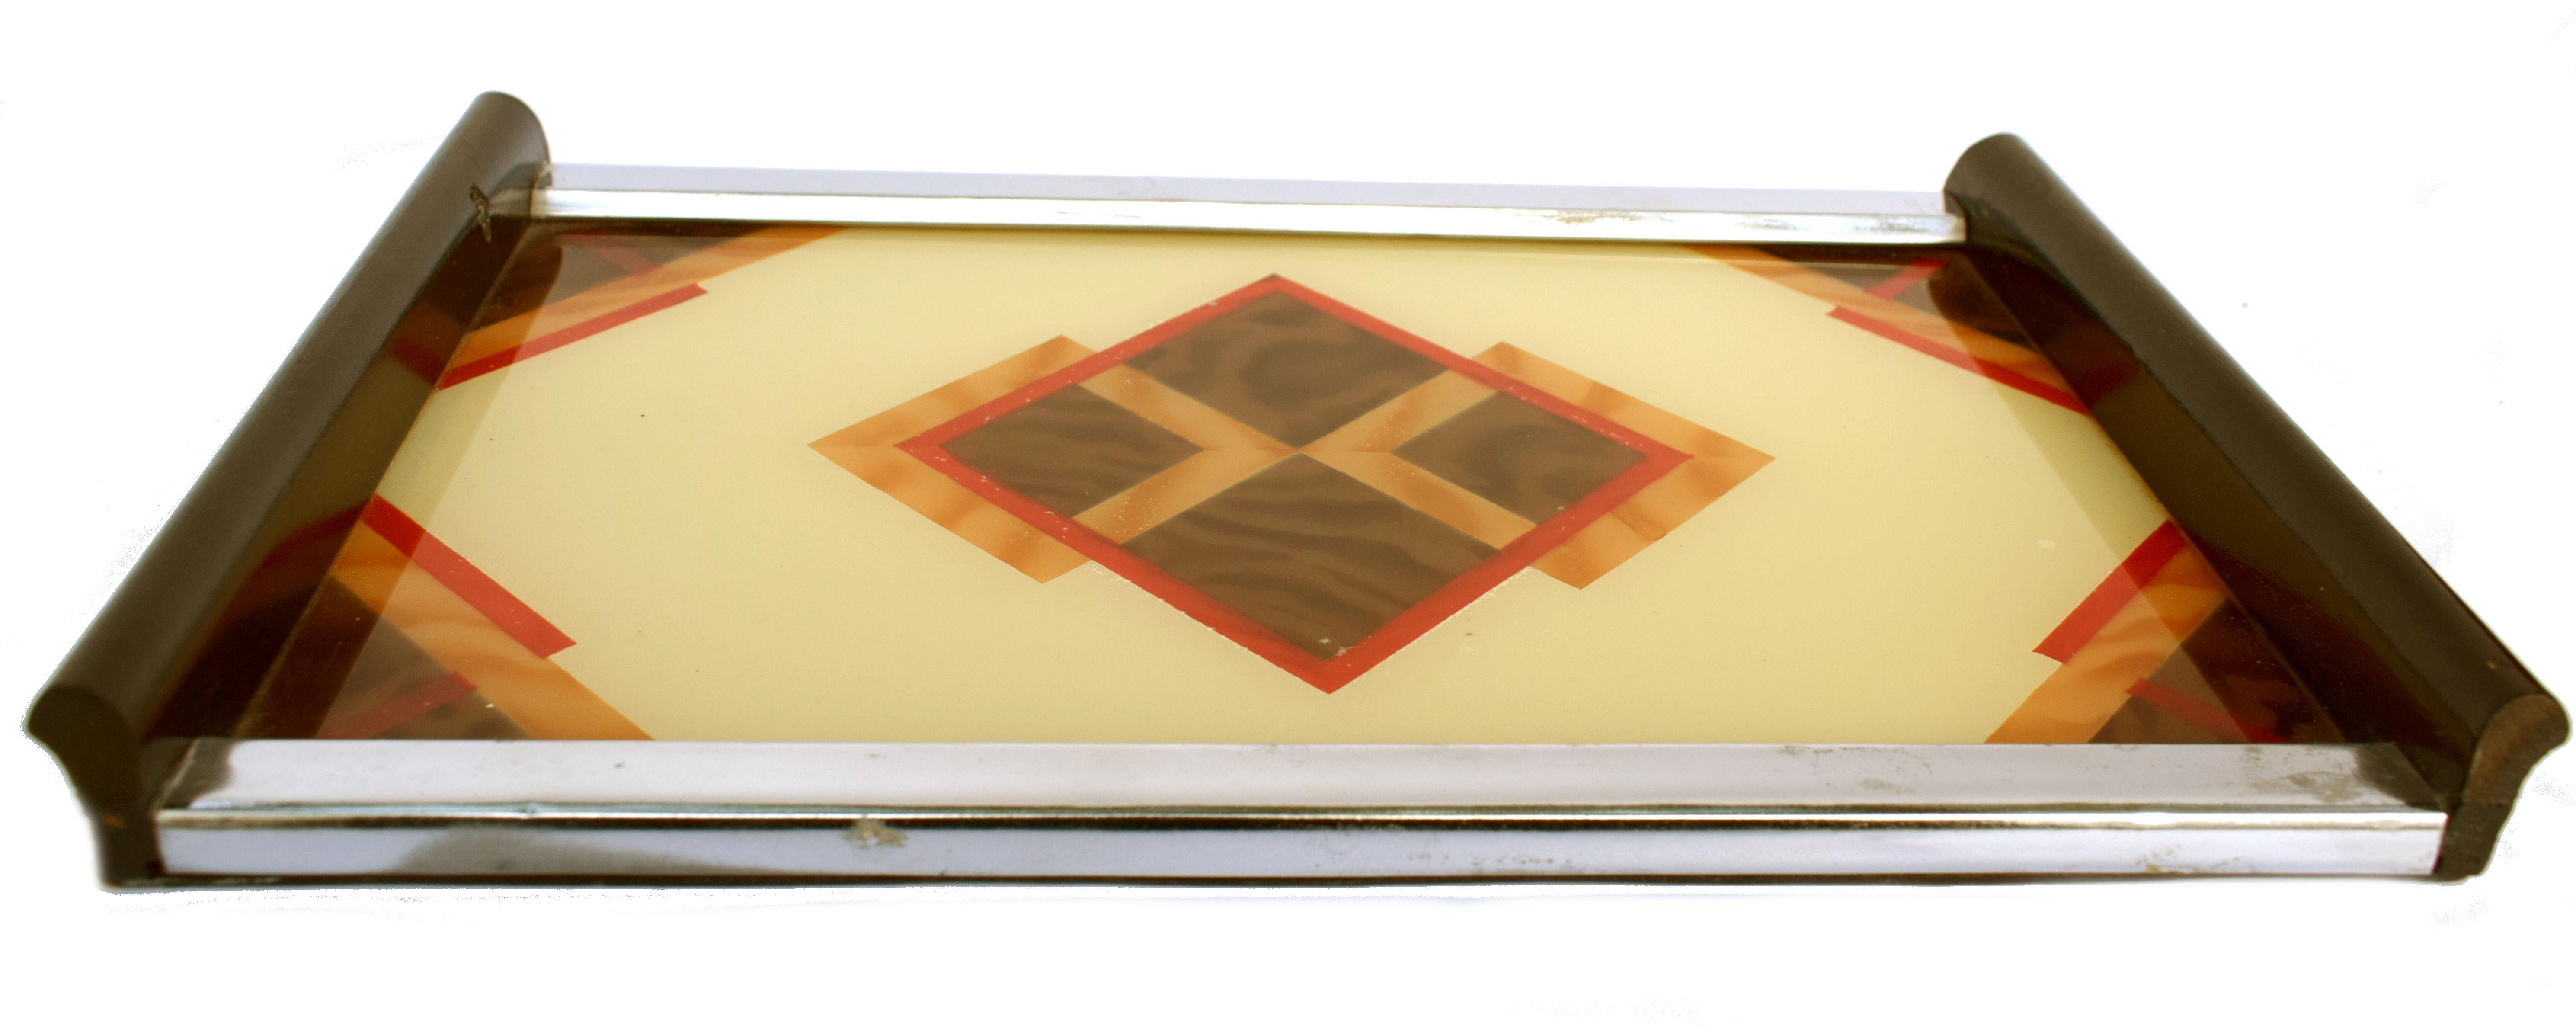 Original 1930s Art Deco tray made in Germany featuring a lovely reverse painted geometric design on glass. Wooden bar handles with chrome sides. Condition is very good. Very distinctive deco motif. Ideal for displaying your barware or serving